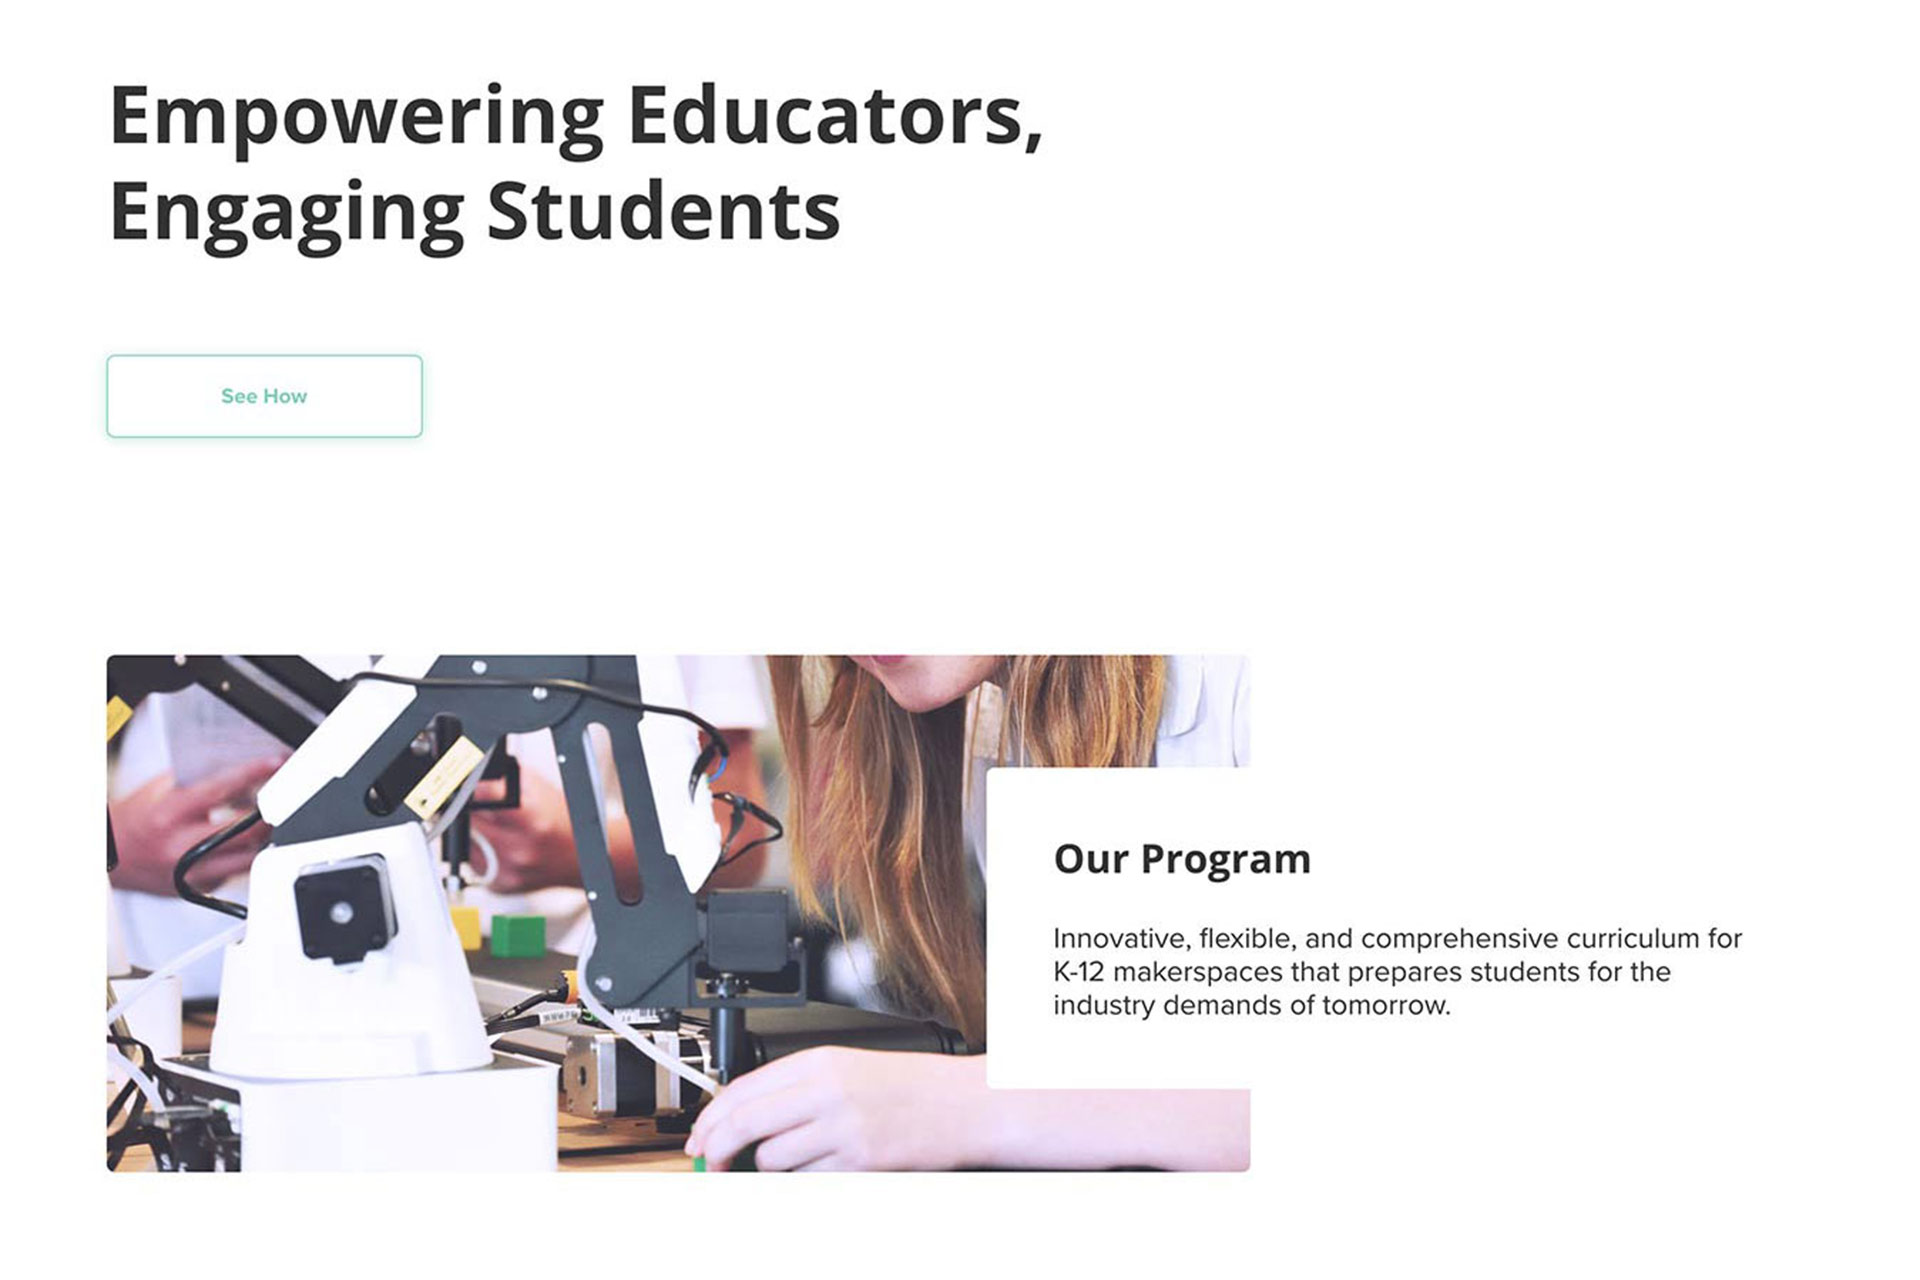 Empower educators, engaging students section of UI UX Design for an educational organization.